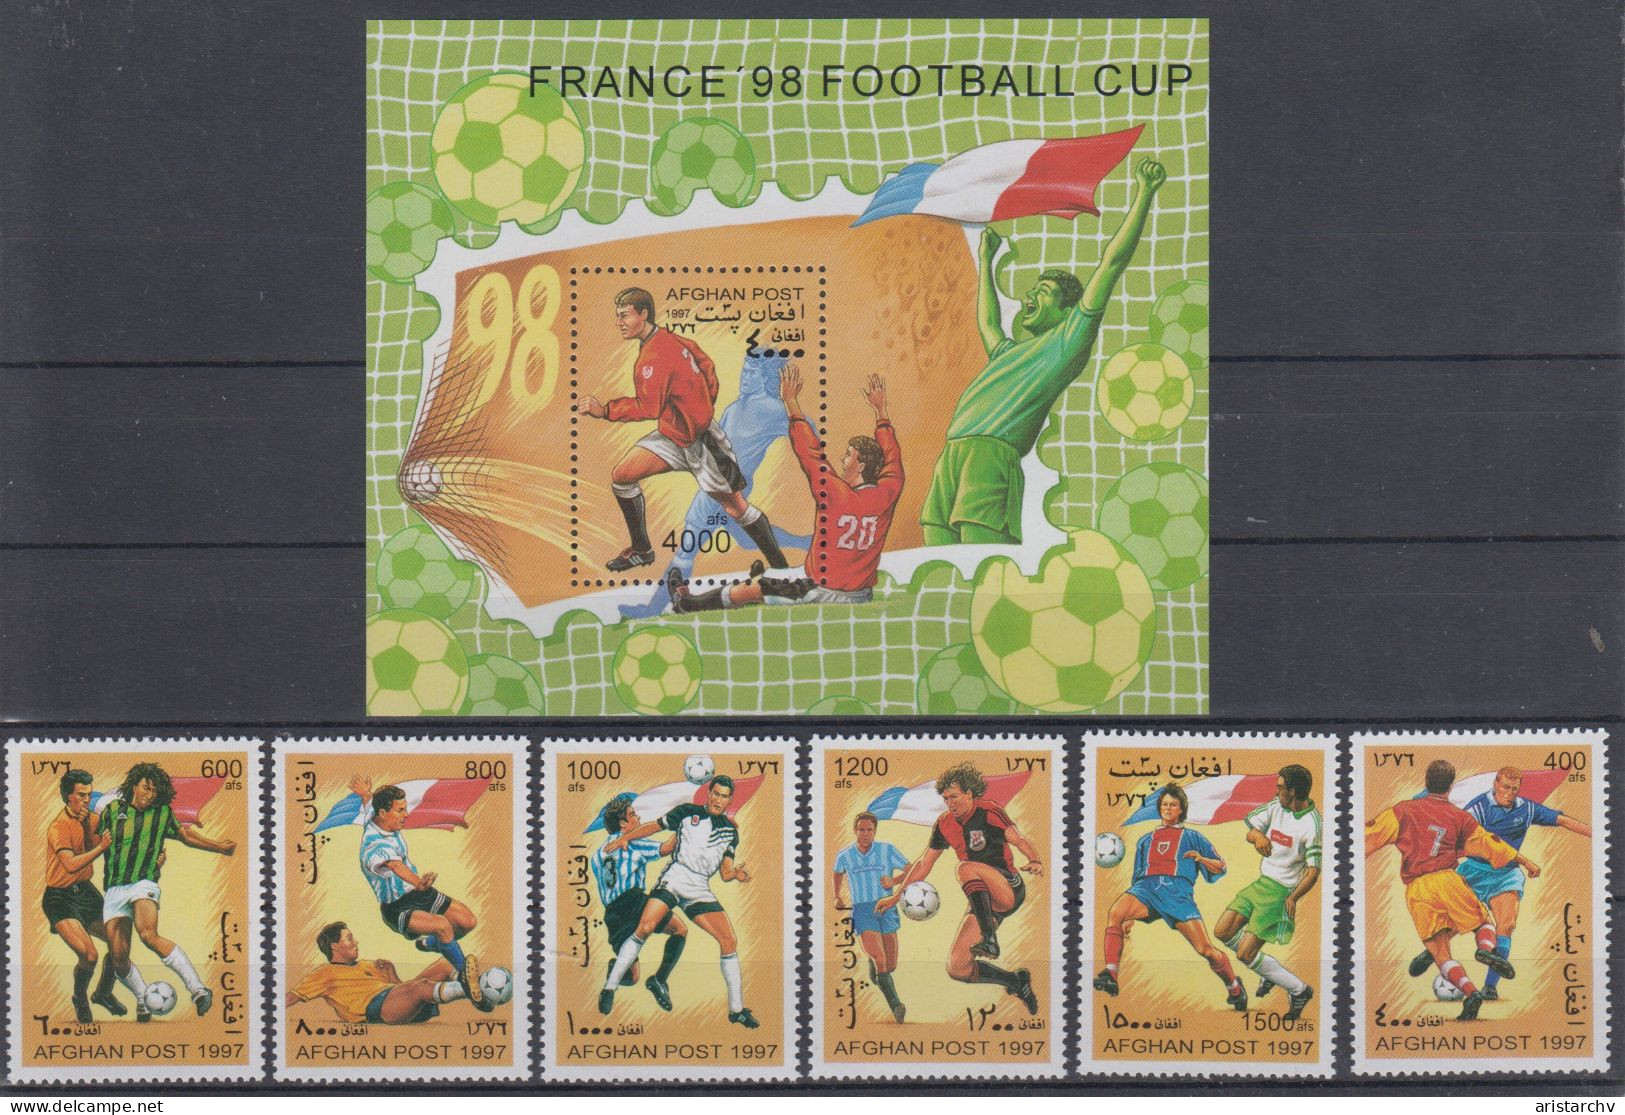 AFGHANISTAN 1998 FOOTBALL WORLD CUP S/SHEET AND 6 STAMPS - 1998 – Frankreich